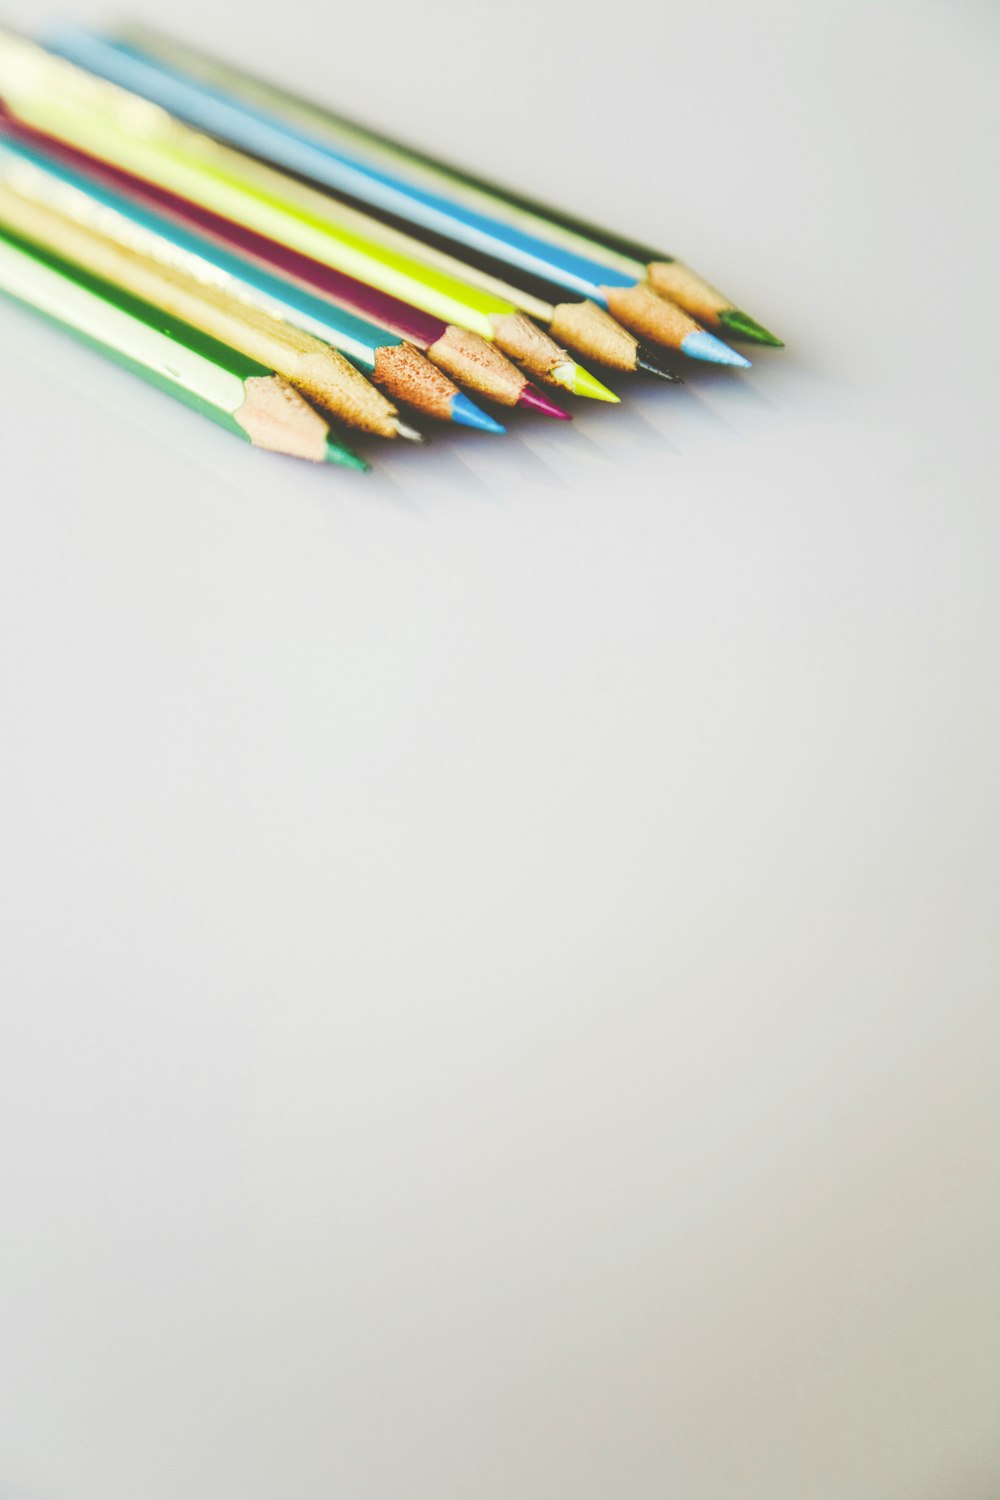 selective focus photography of assorted-color pencils on white surface